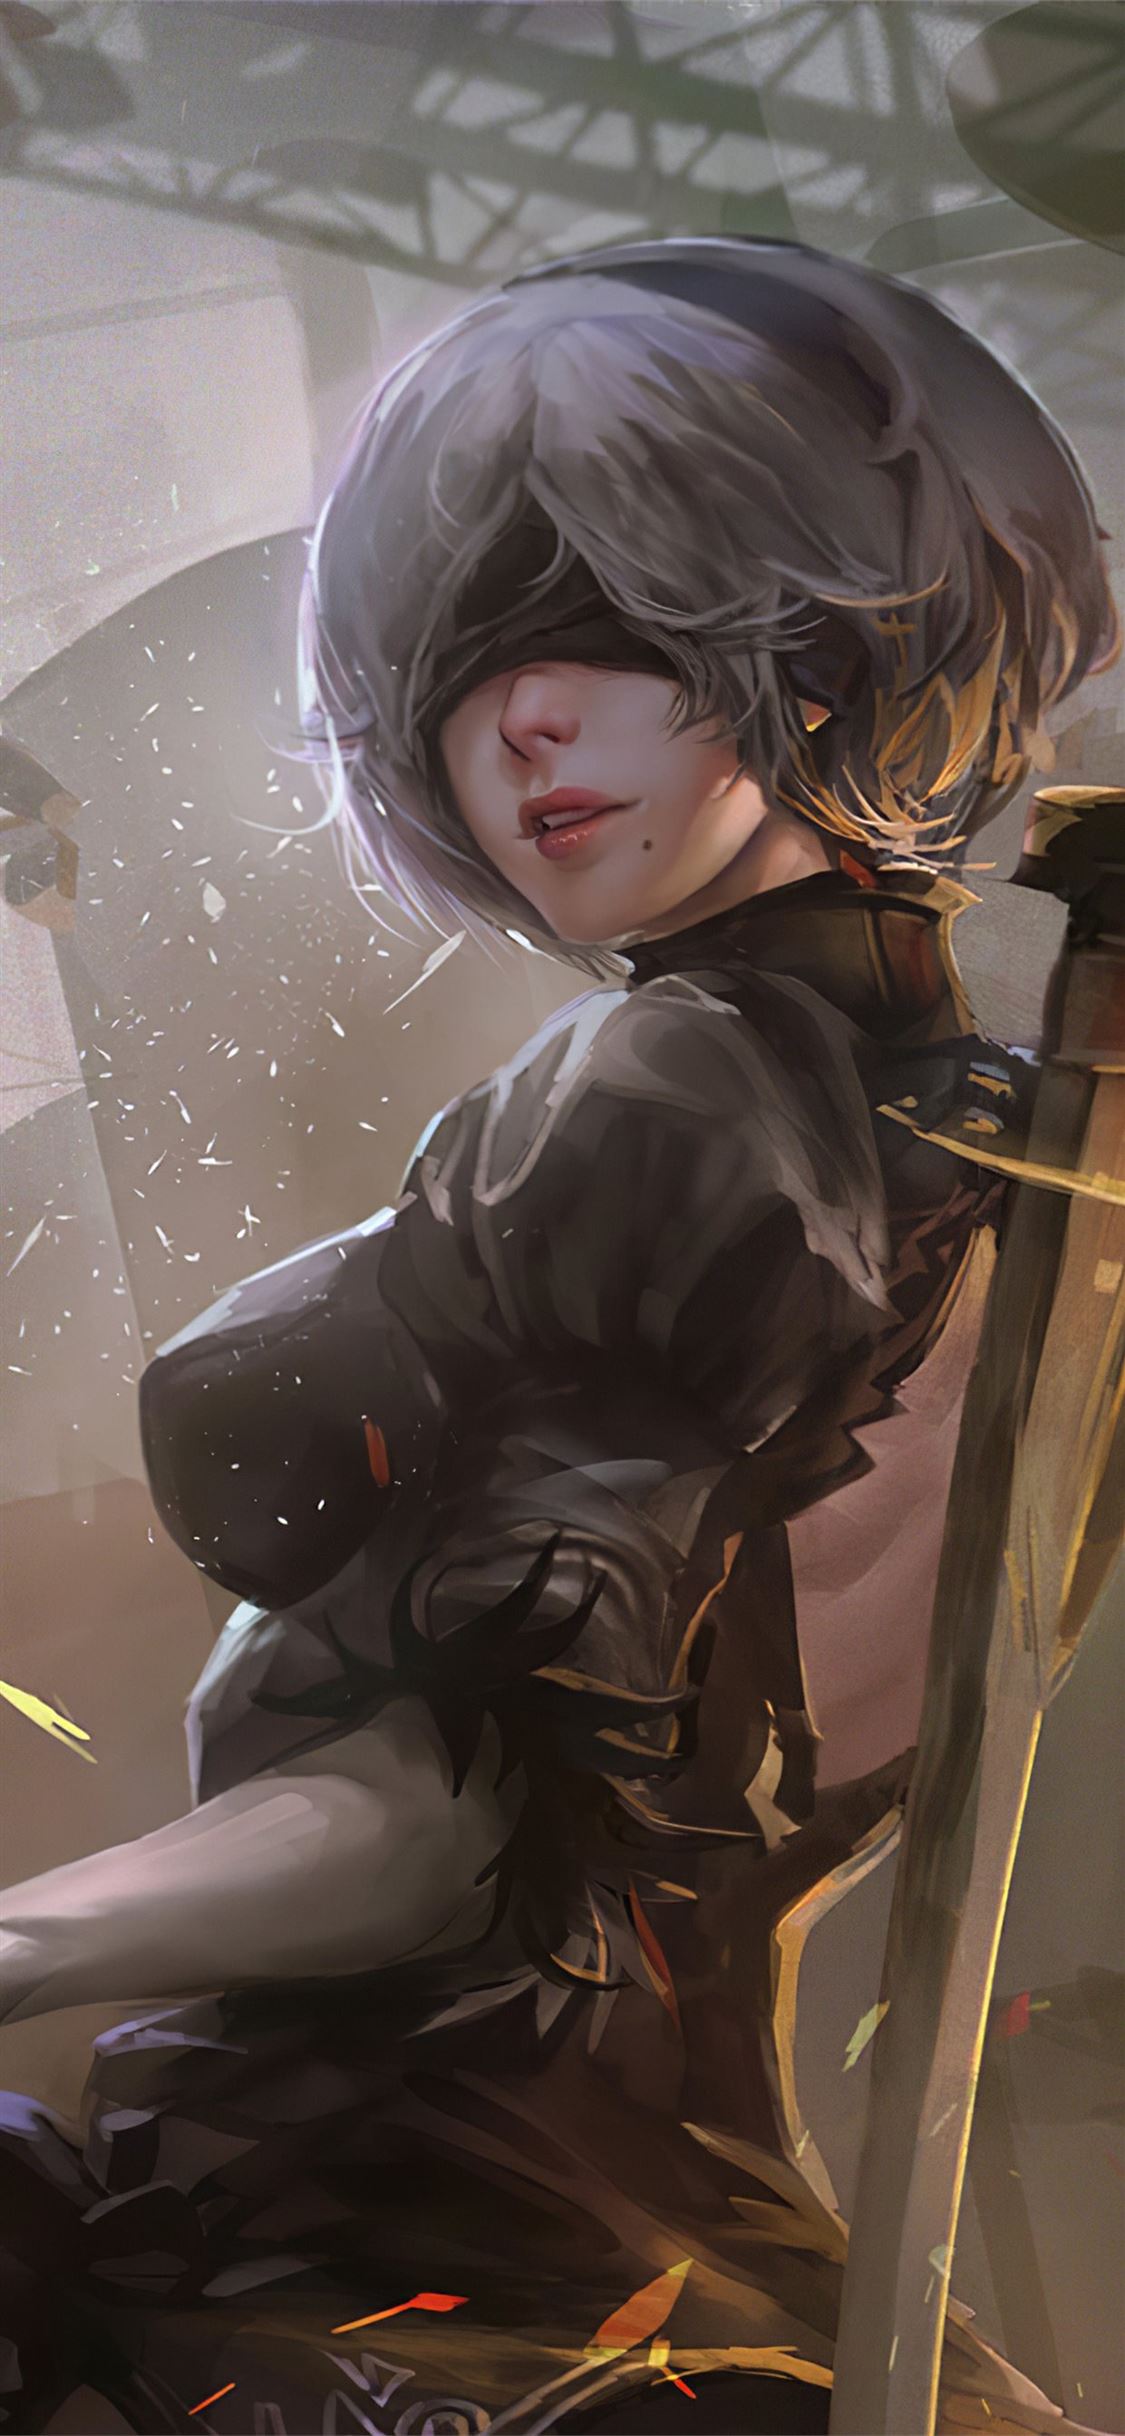 2B Nier Automata 4K 2020 Iphone X Wallpapers Free Download